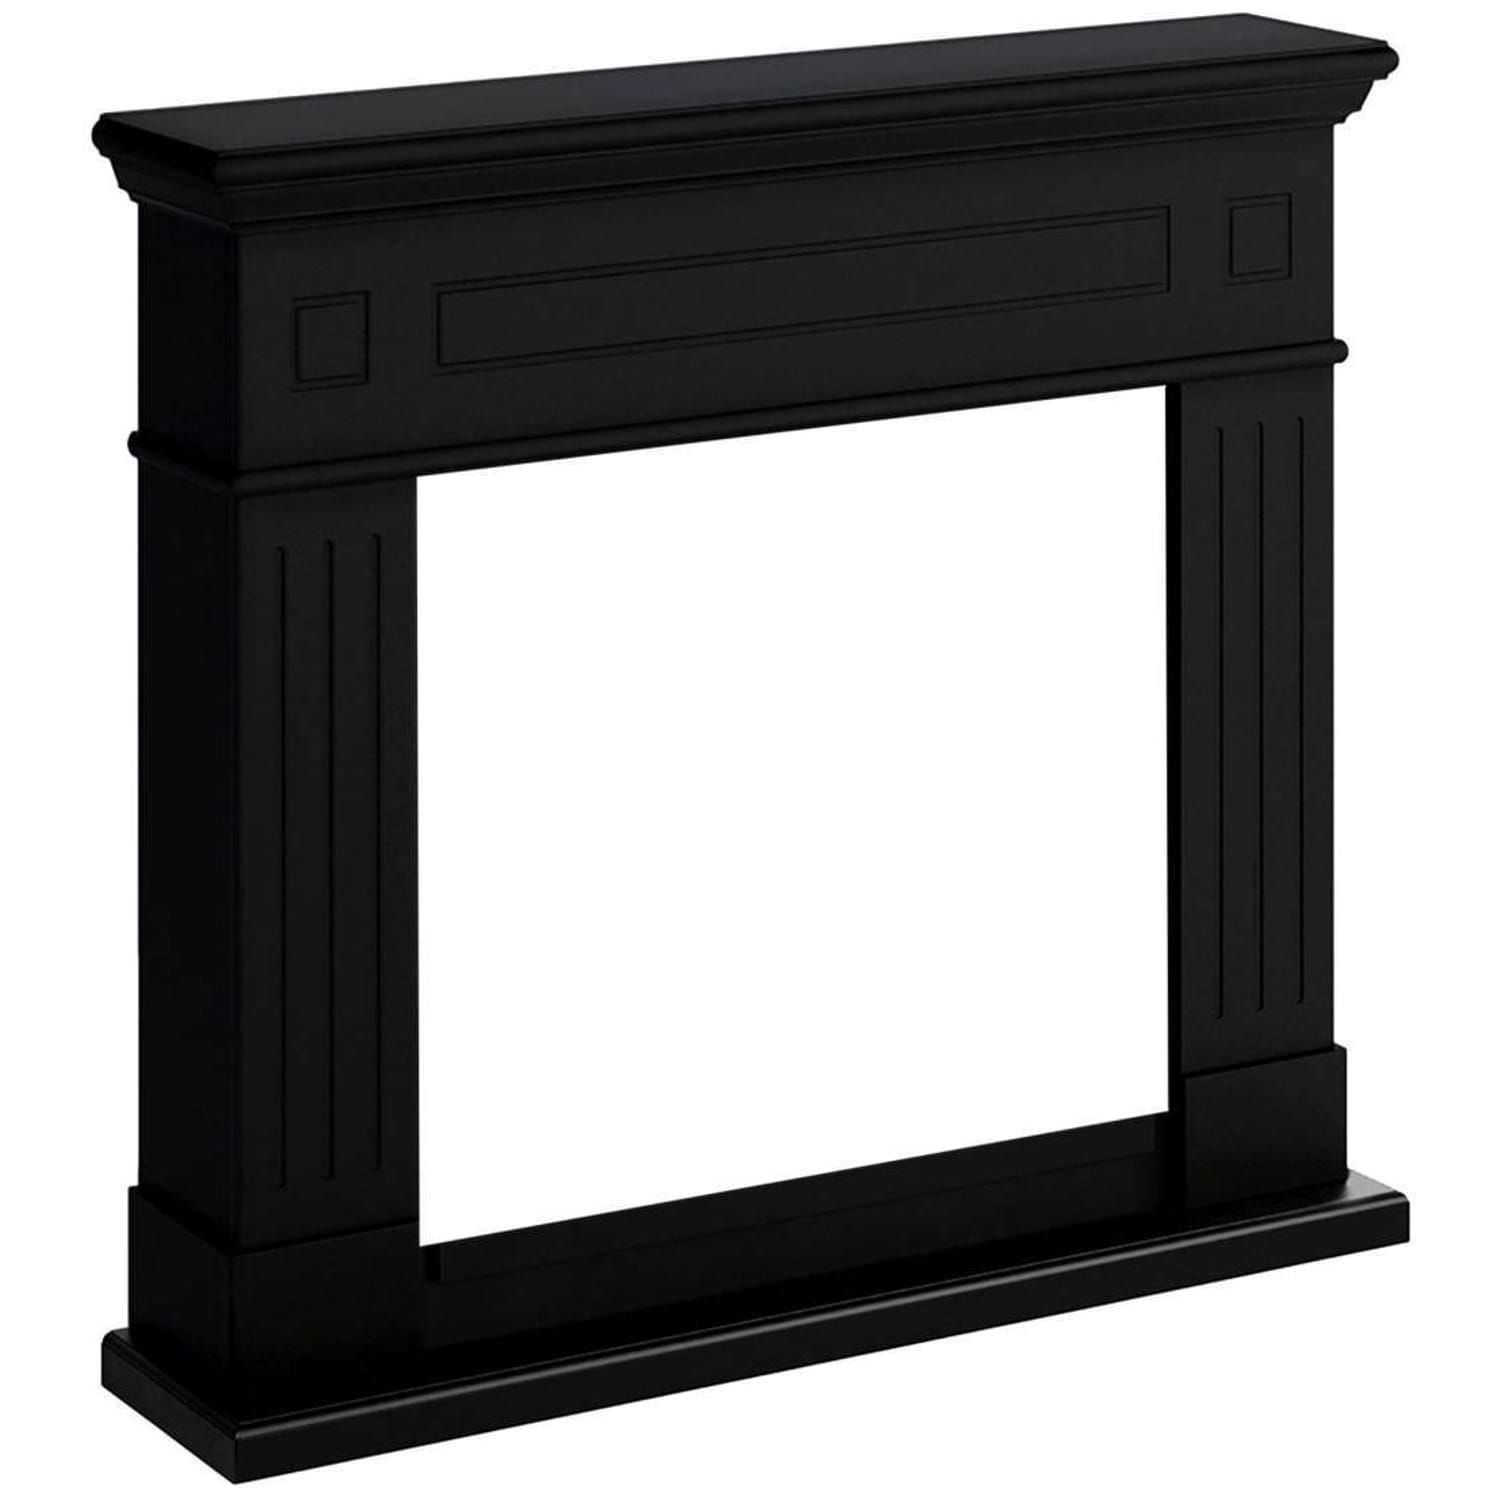 Black Coating For Fireplace